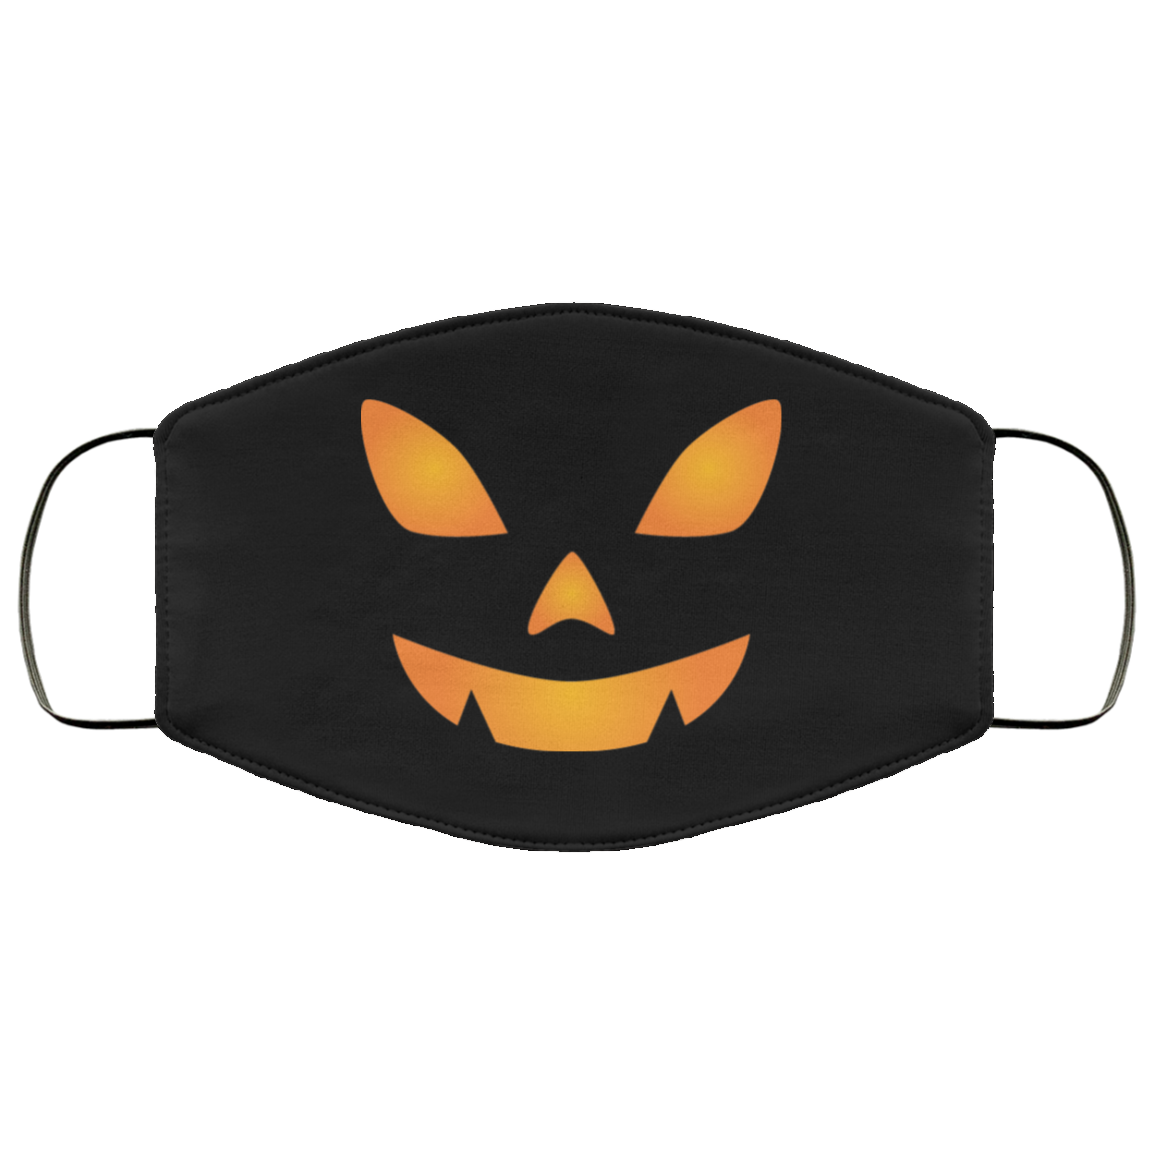 Halloween Face Mask PNG Pic Background